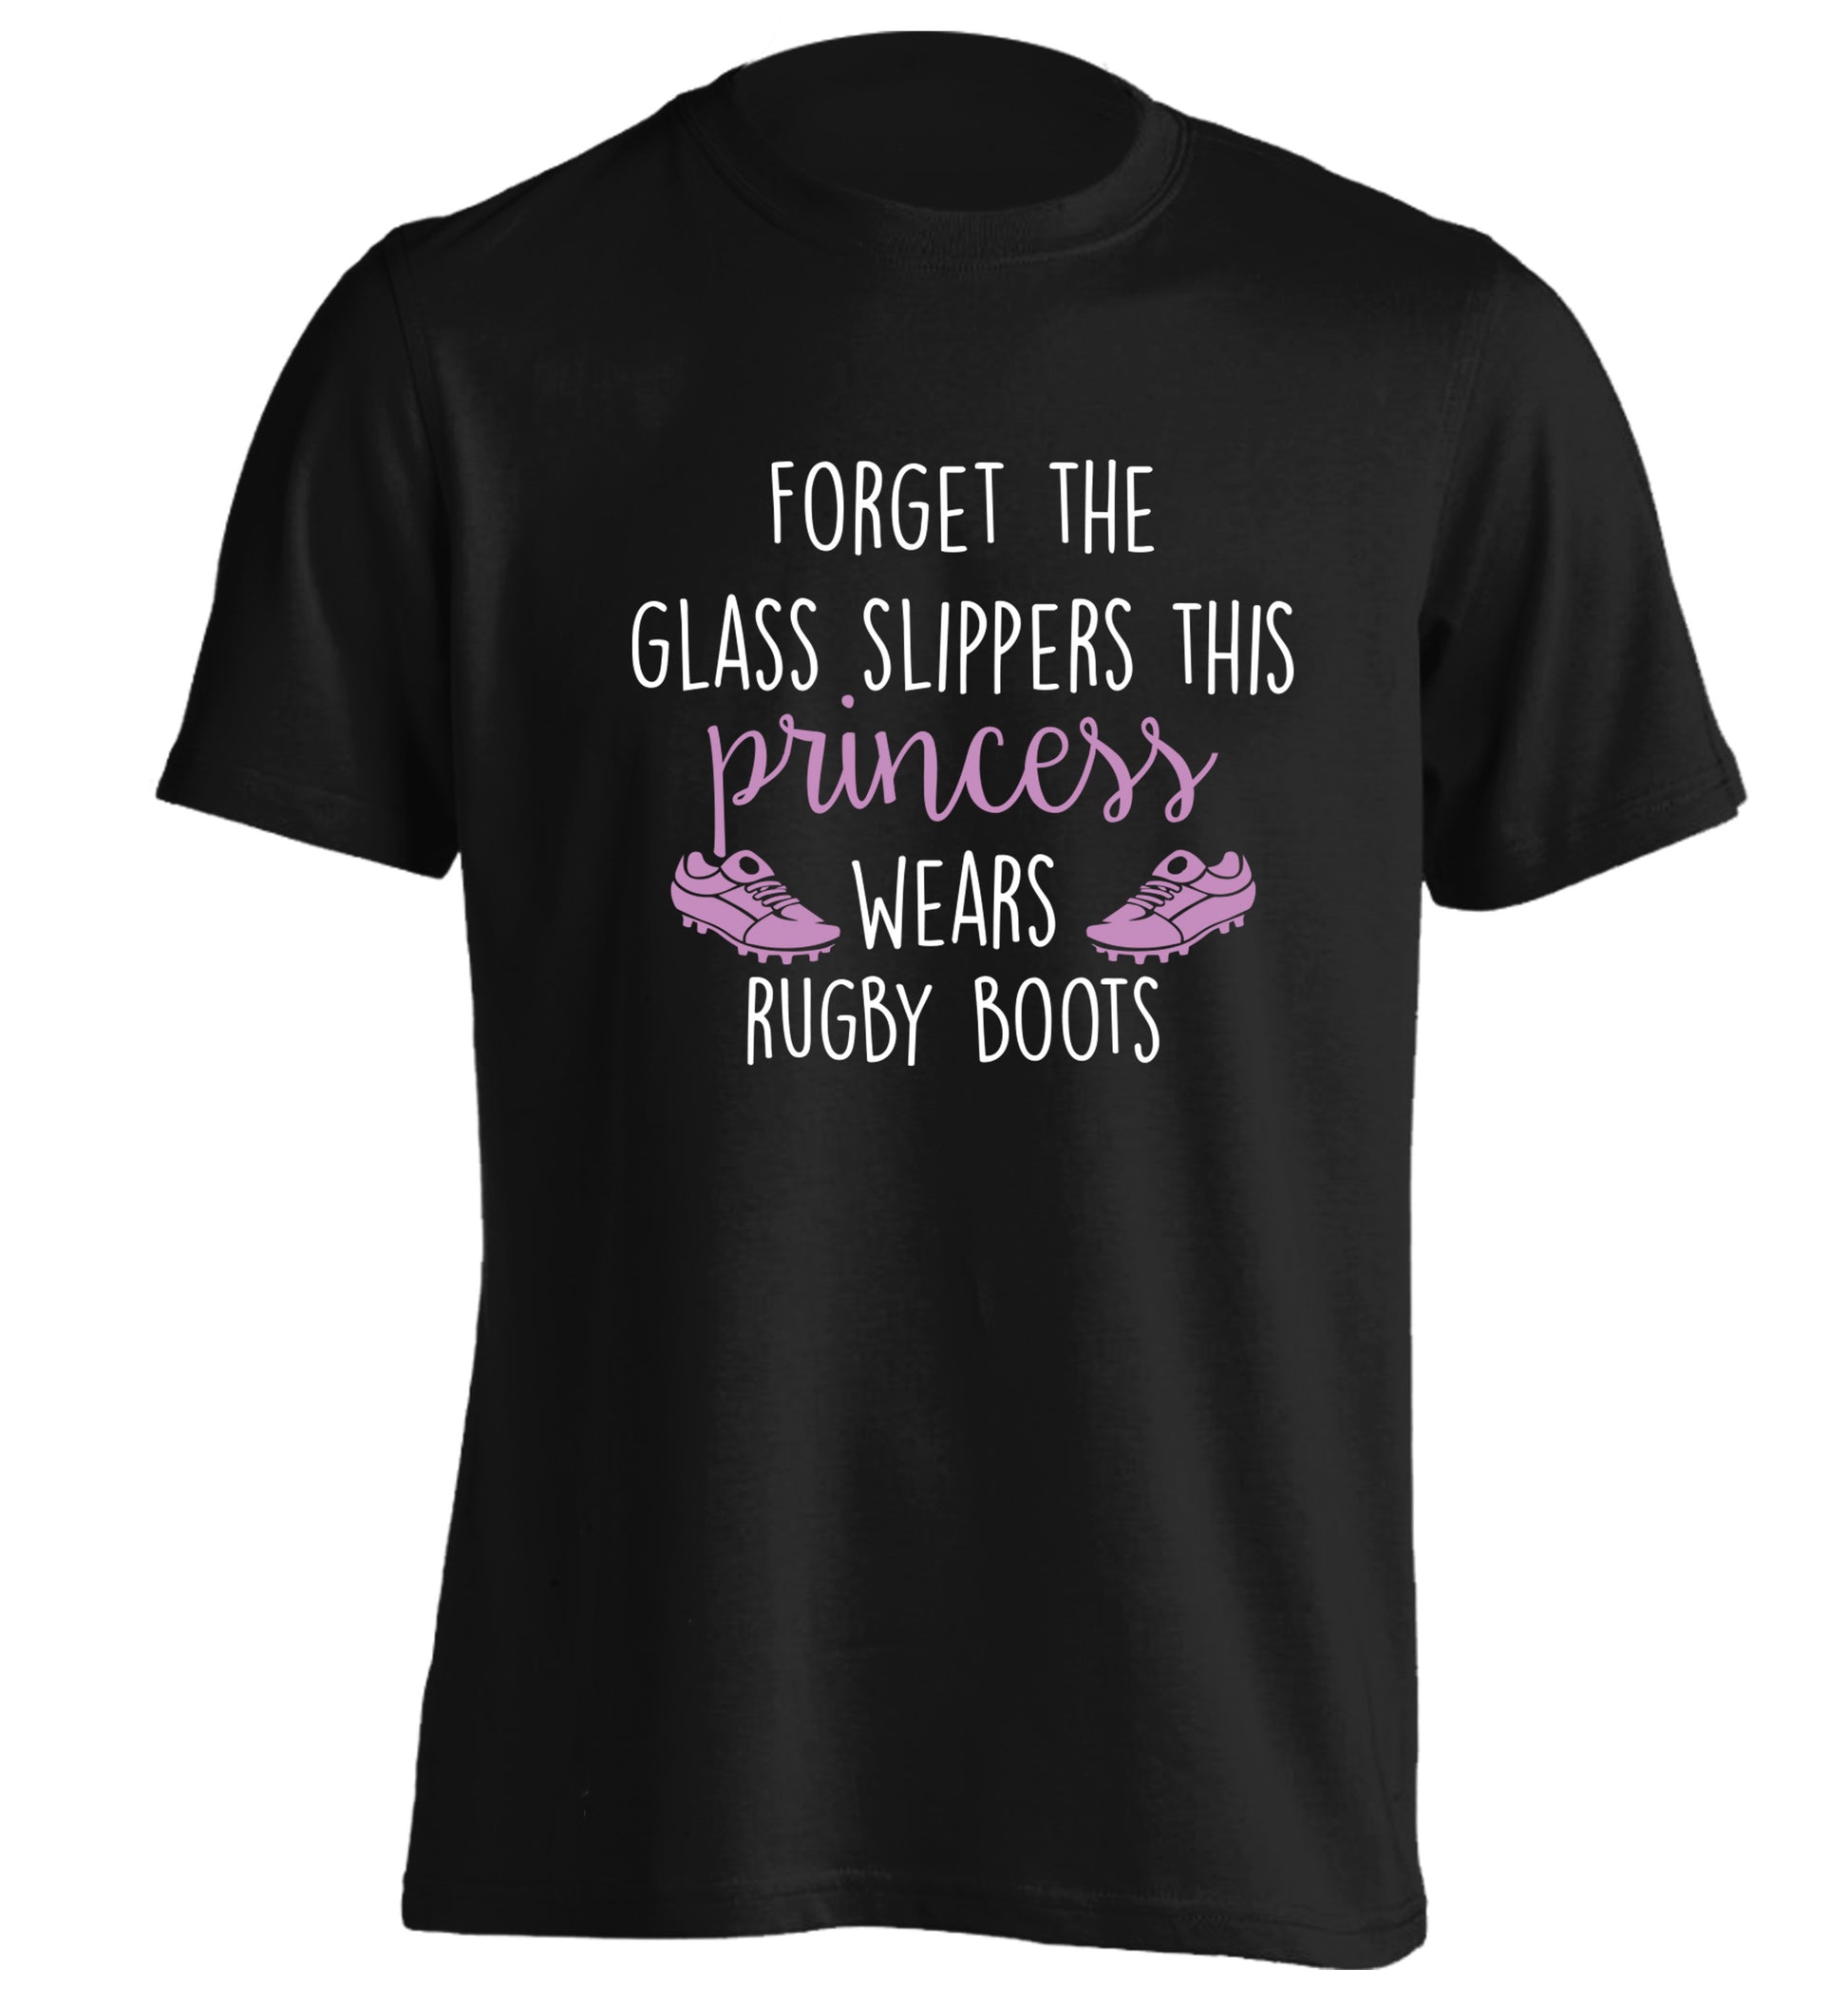 Forget the glass slippers this princess wears rugby boots adults unisex black Tshirt 2XL